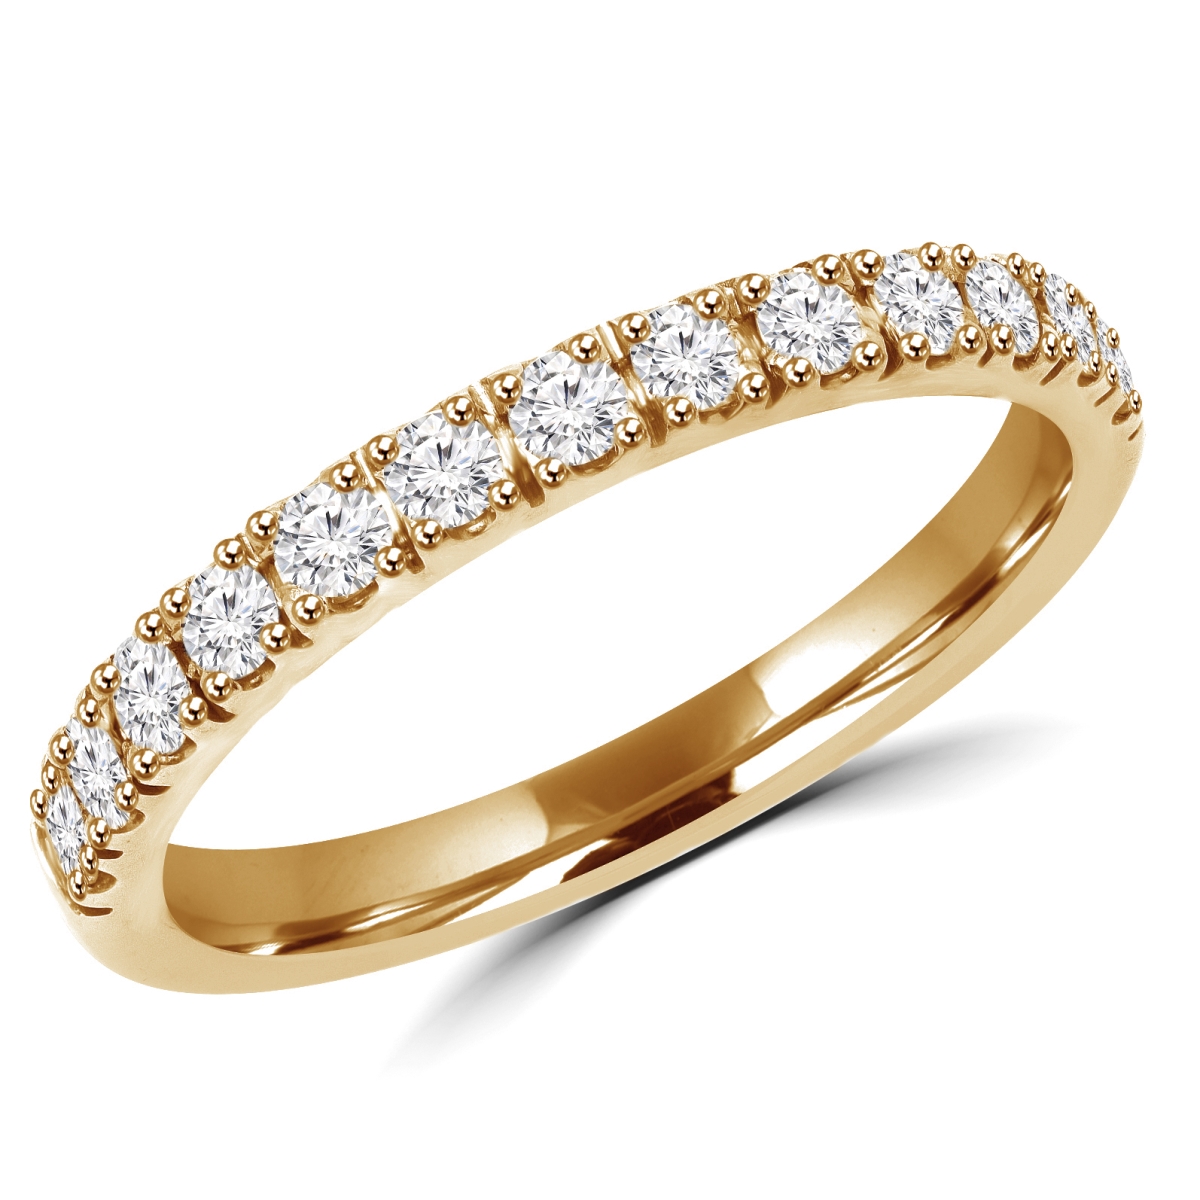 Picture of Majesty Diamonds MD180187-8 0.3 CTW Round Diamond Semi-Eternity Wedding Band Ring in 14K Yellow Gold - Size 8